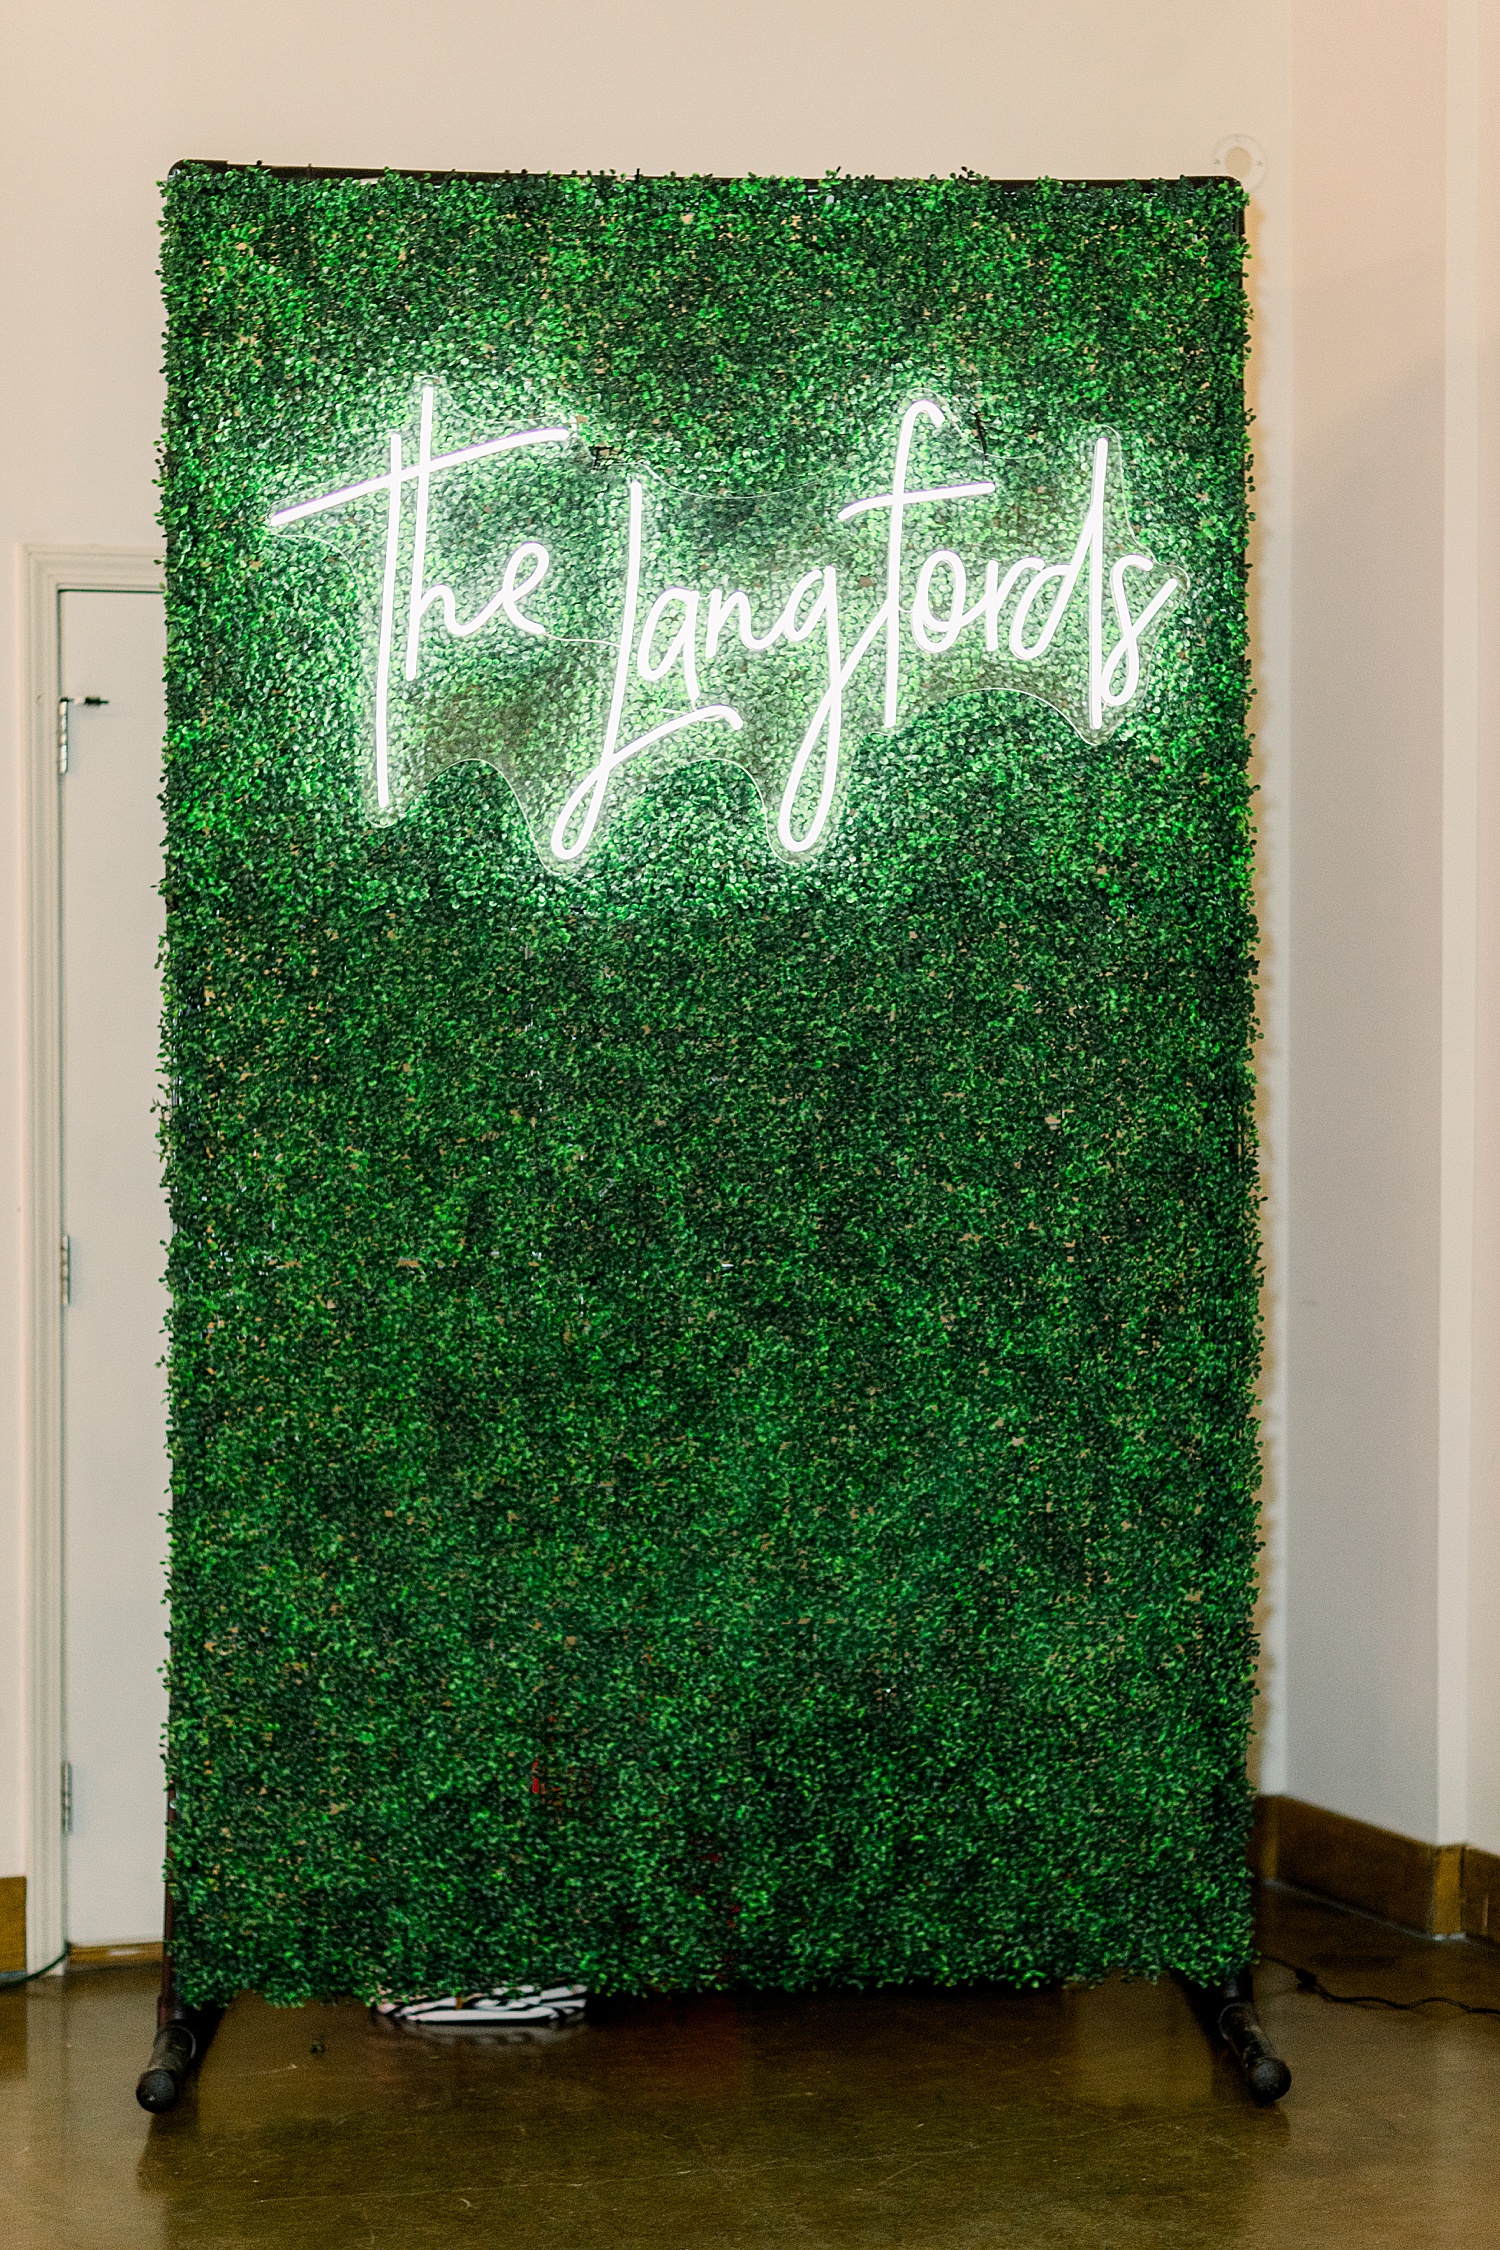 green wall with neon sign for Douglas Manor wedding reception